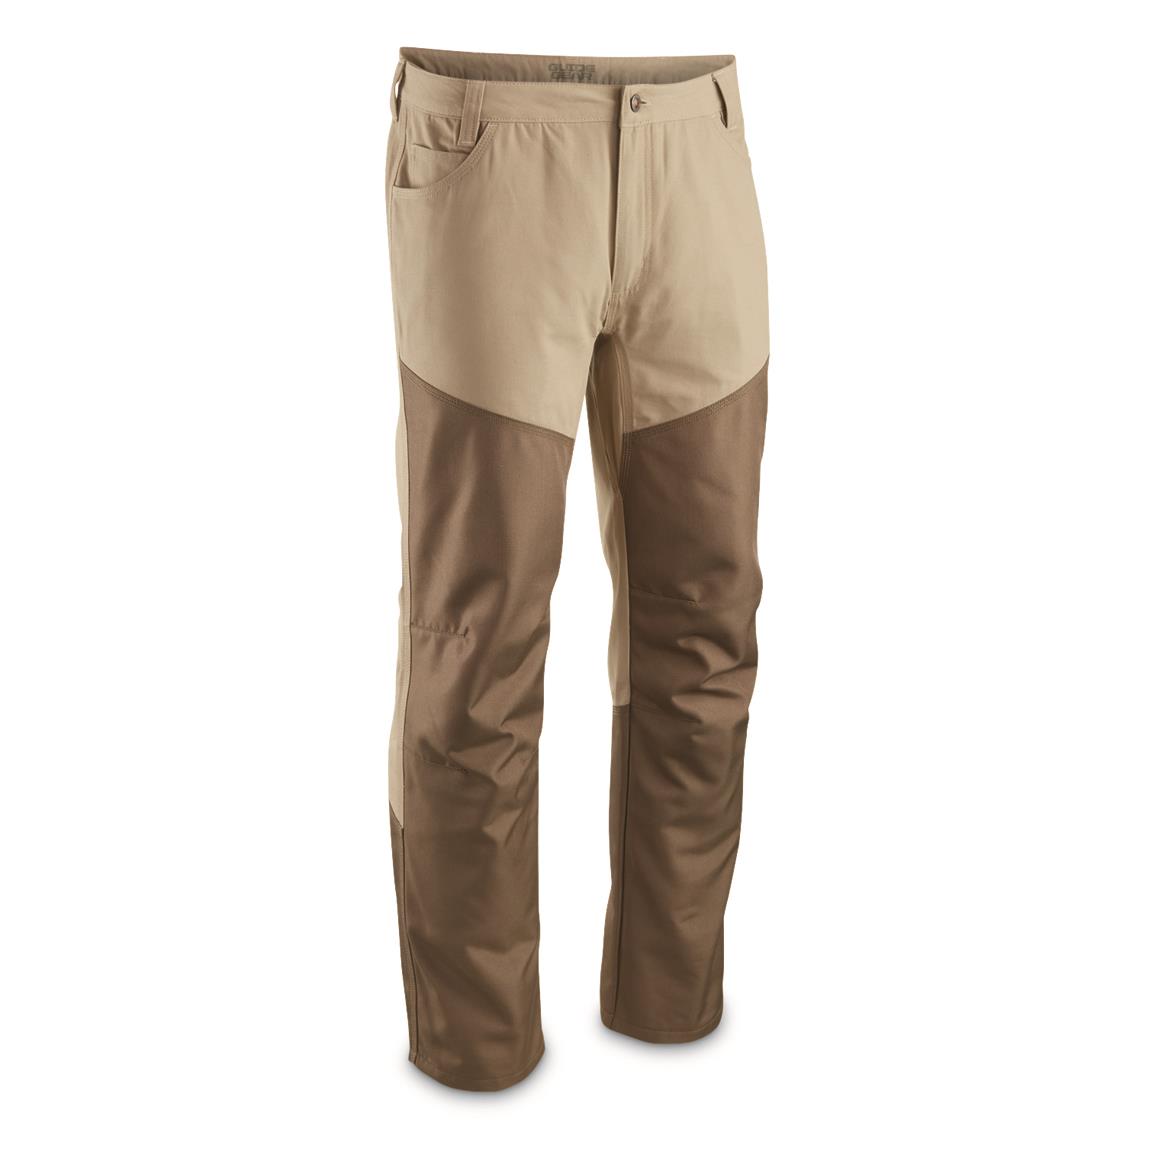 Guide Gear Men's Upland Brush Pants - 703941, Camo Pants at Sportsman's  Guide